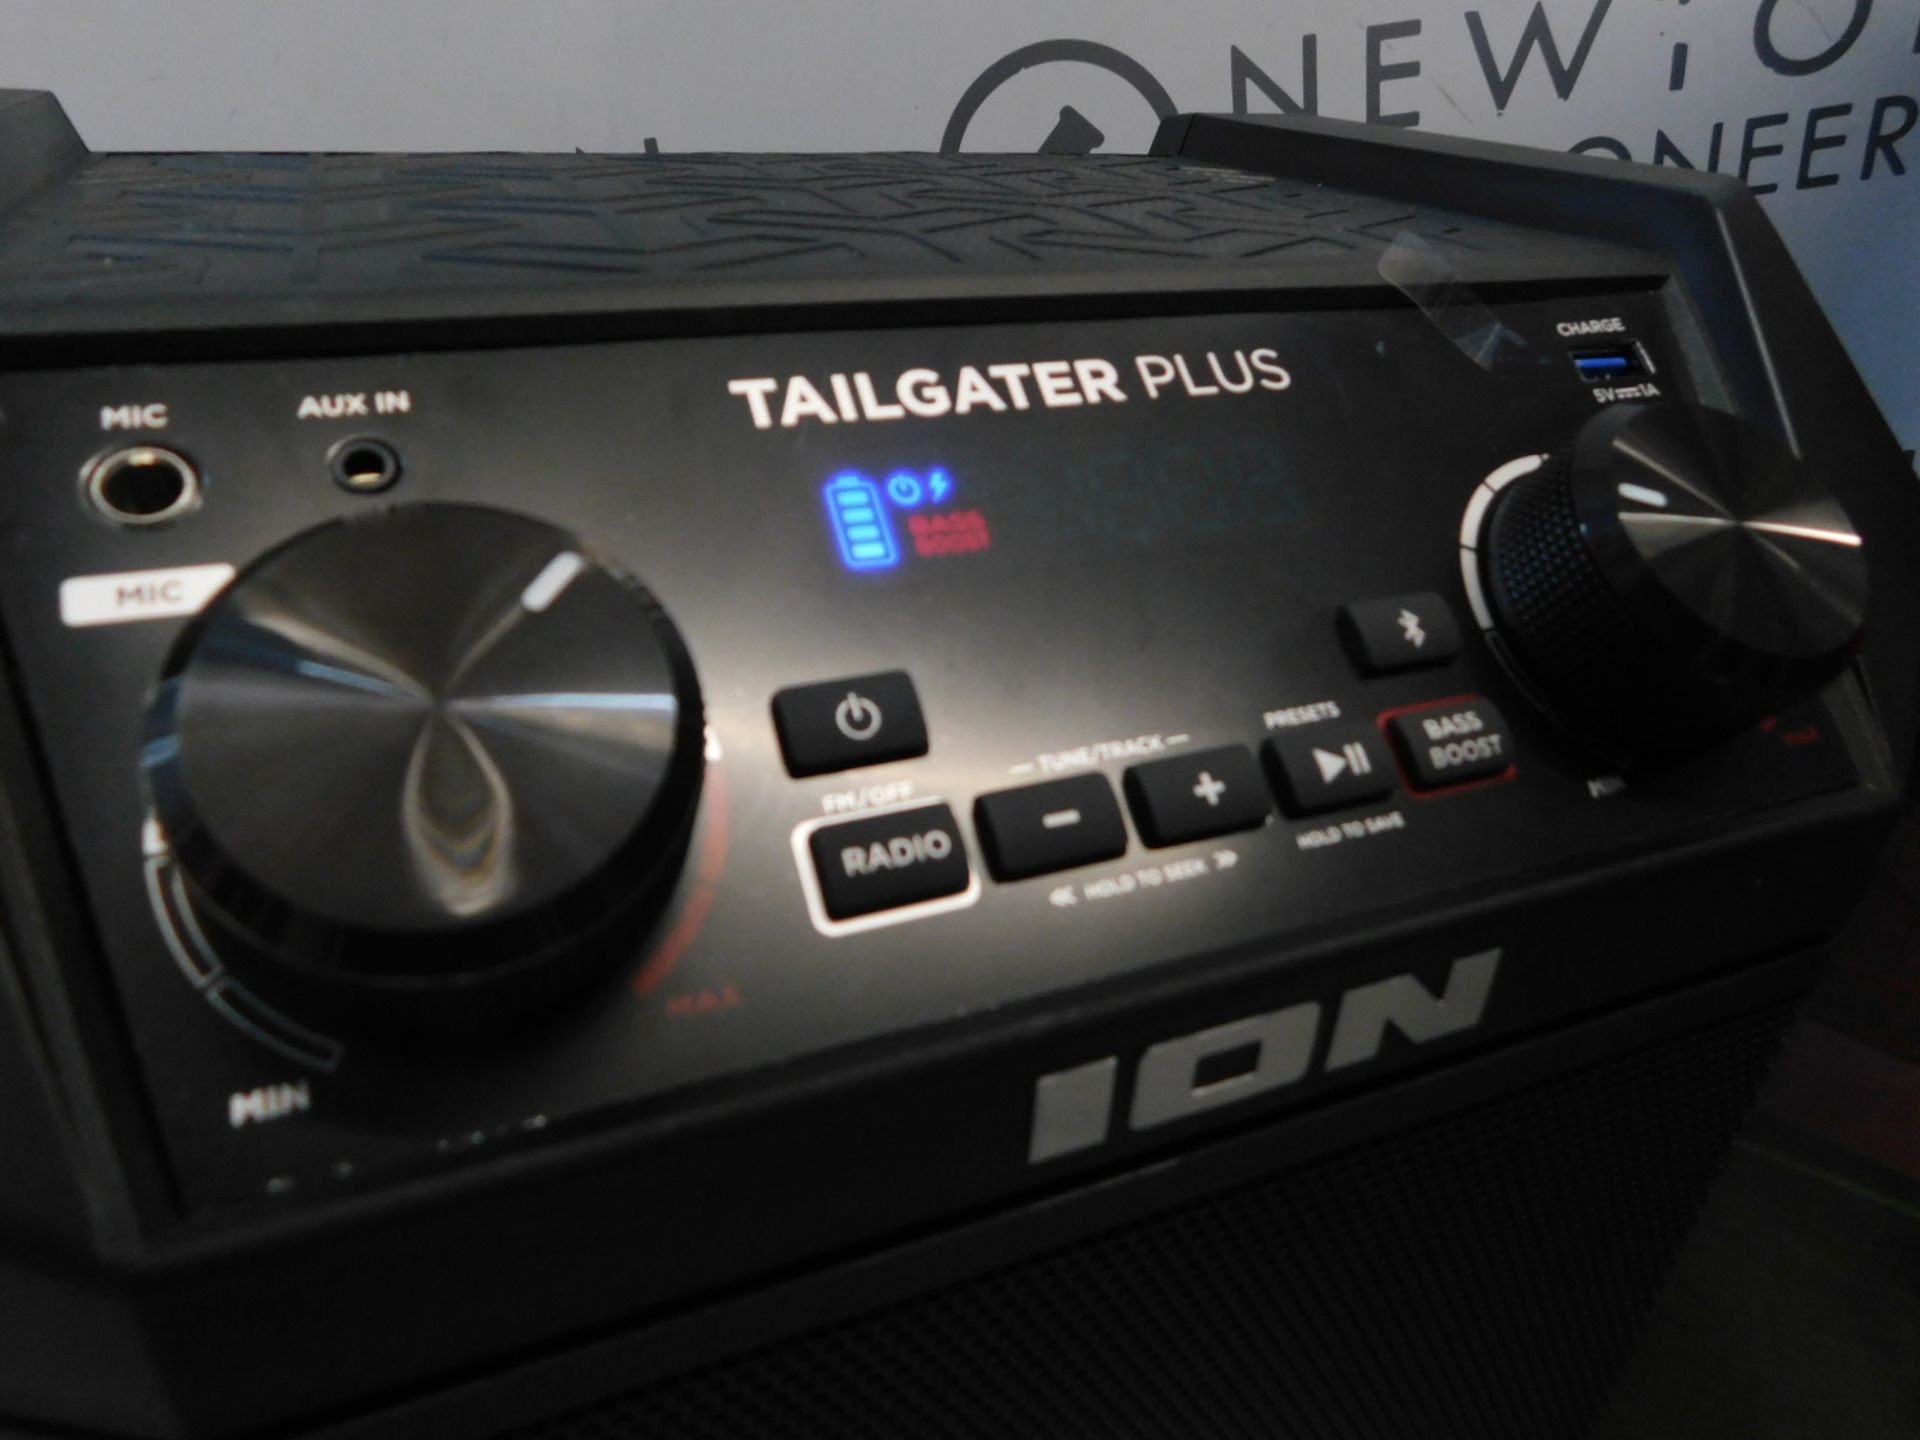 1 BOXED ION TAILGATER PLUS WIRELESS RECHARGEABLE PORTABLE SPEAKER SYSTEM RRP Â£129 - Image 4 of 4